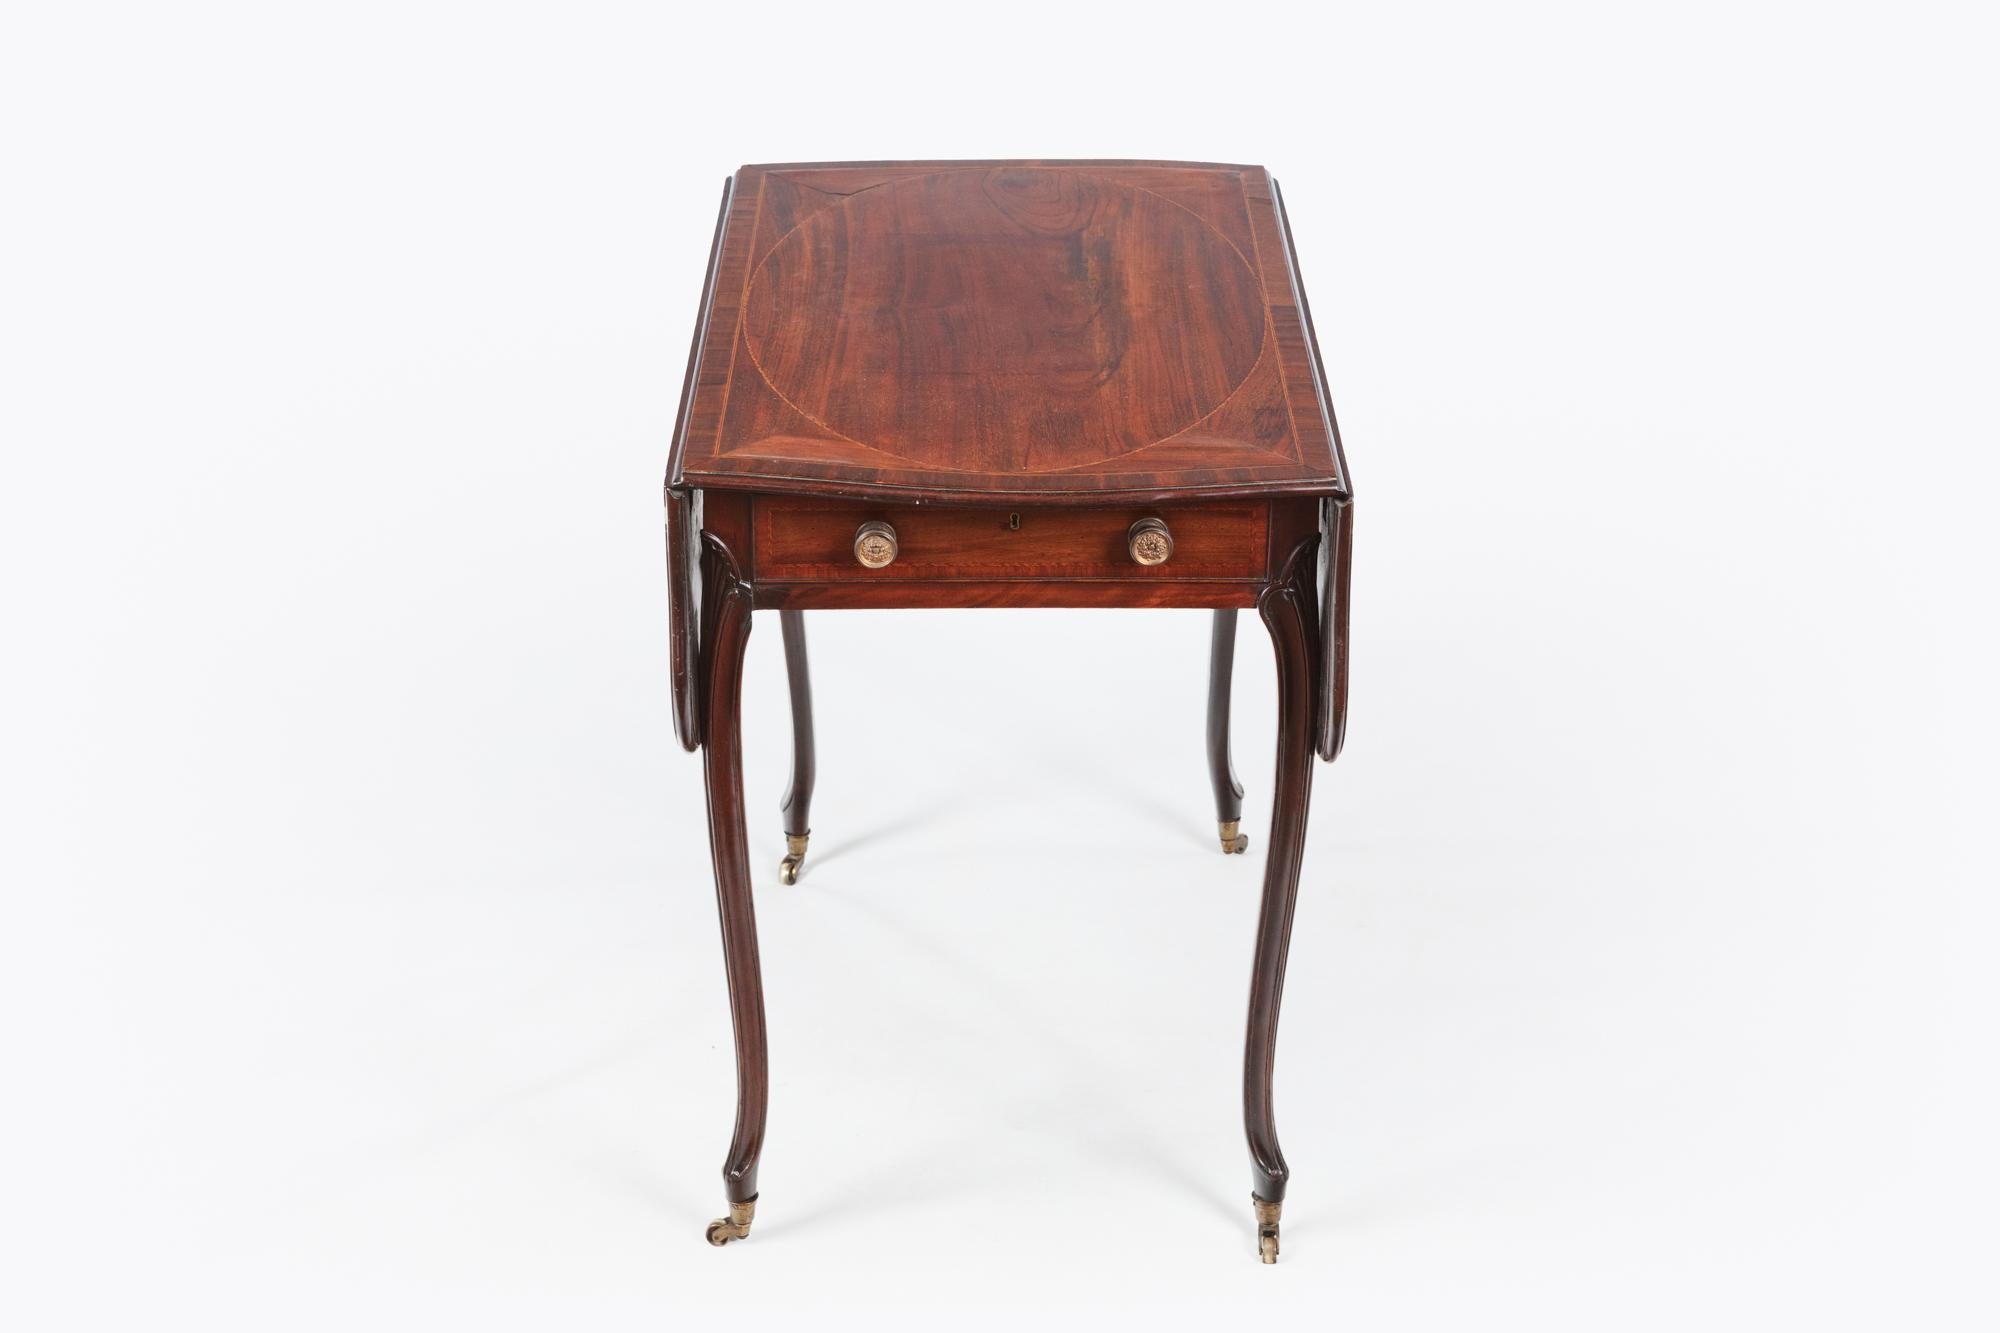 Late 18th century George III mahogany Pembroke table. The butterfly shaped top with satinwood crossbanding above a frieze drawer and opposing sham drawer, on fan-carved cabriole legs ending in molded feet raised on caps and leather casters. After